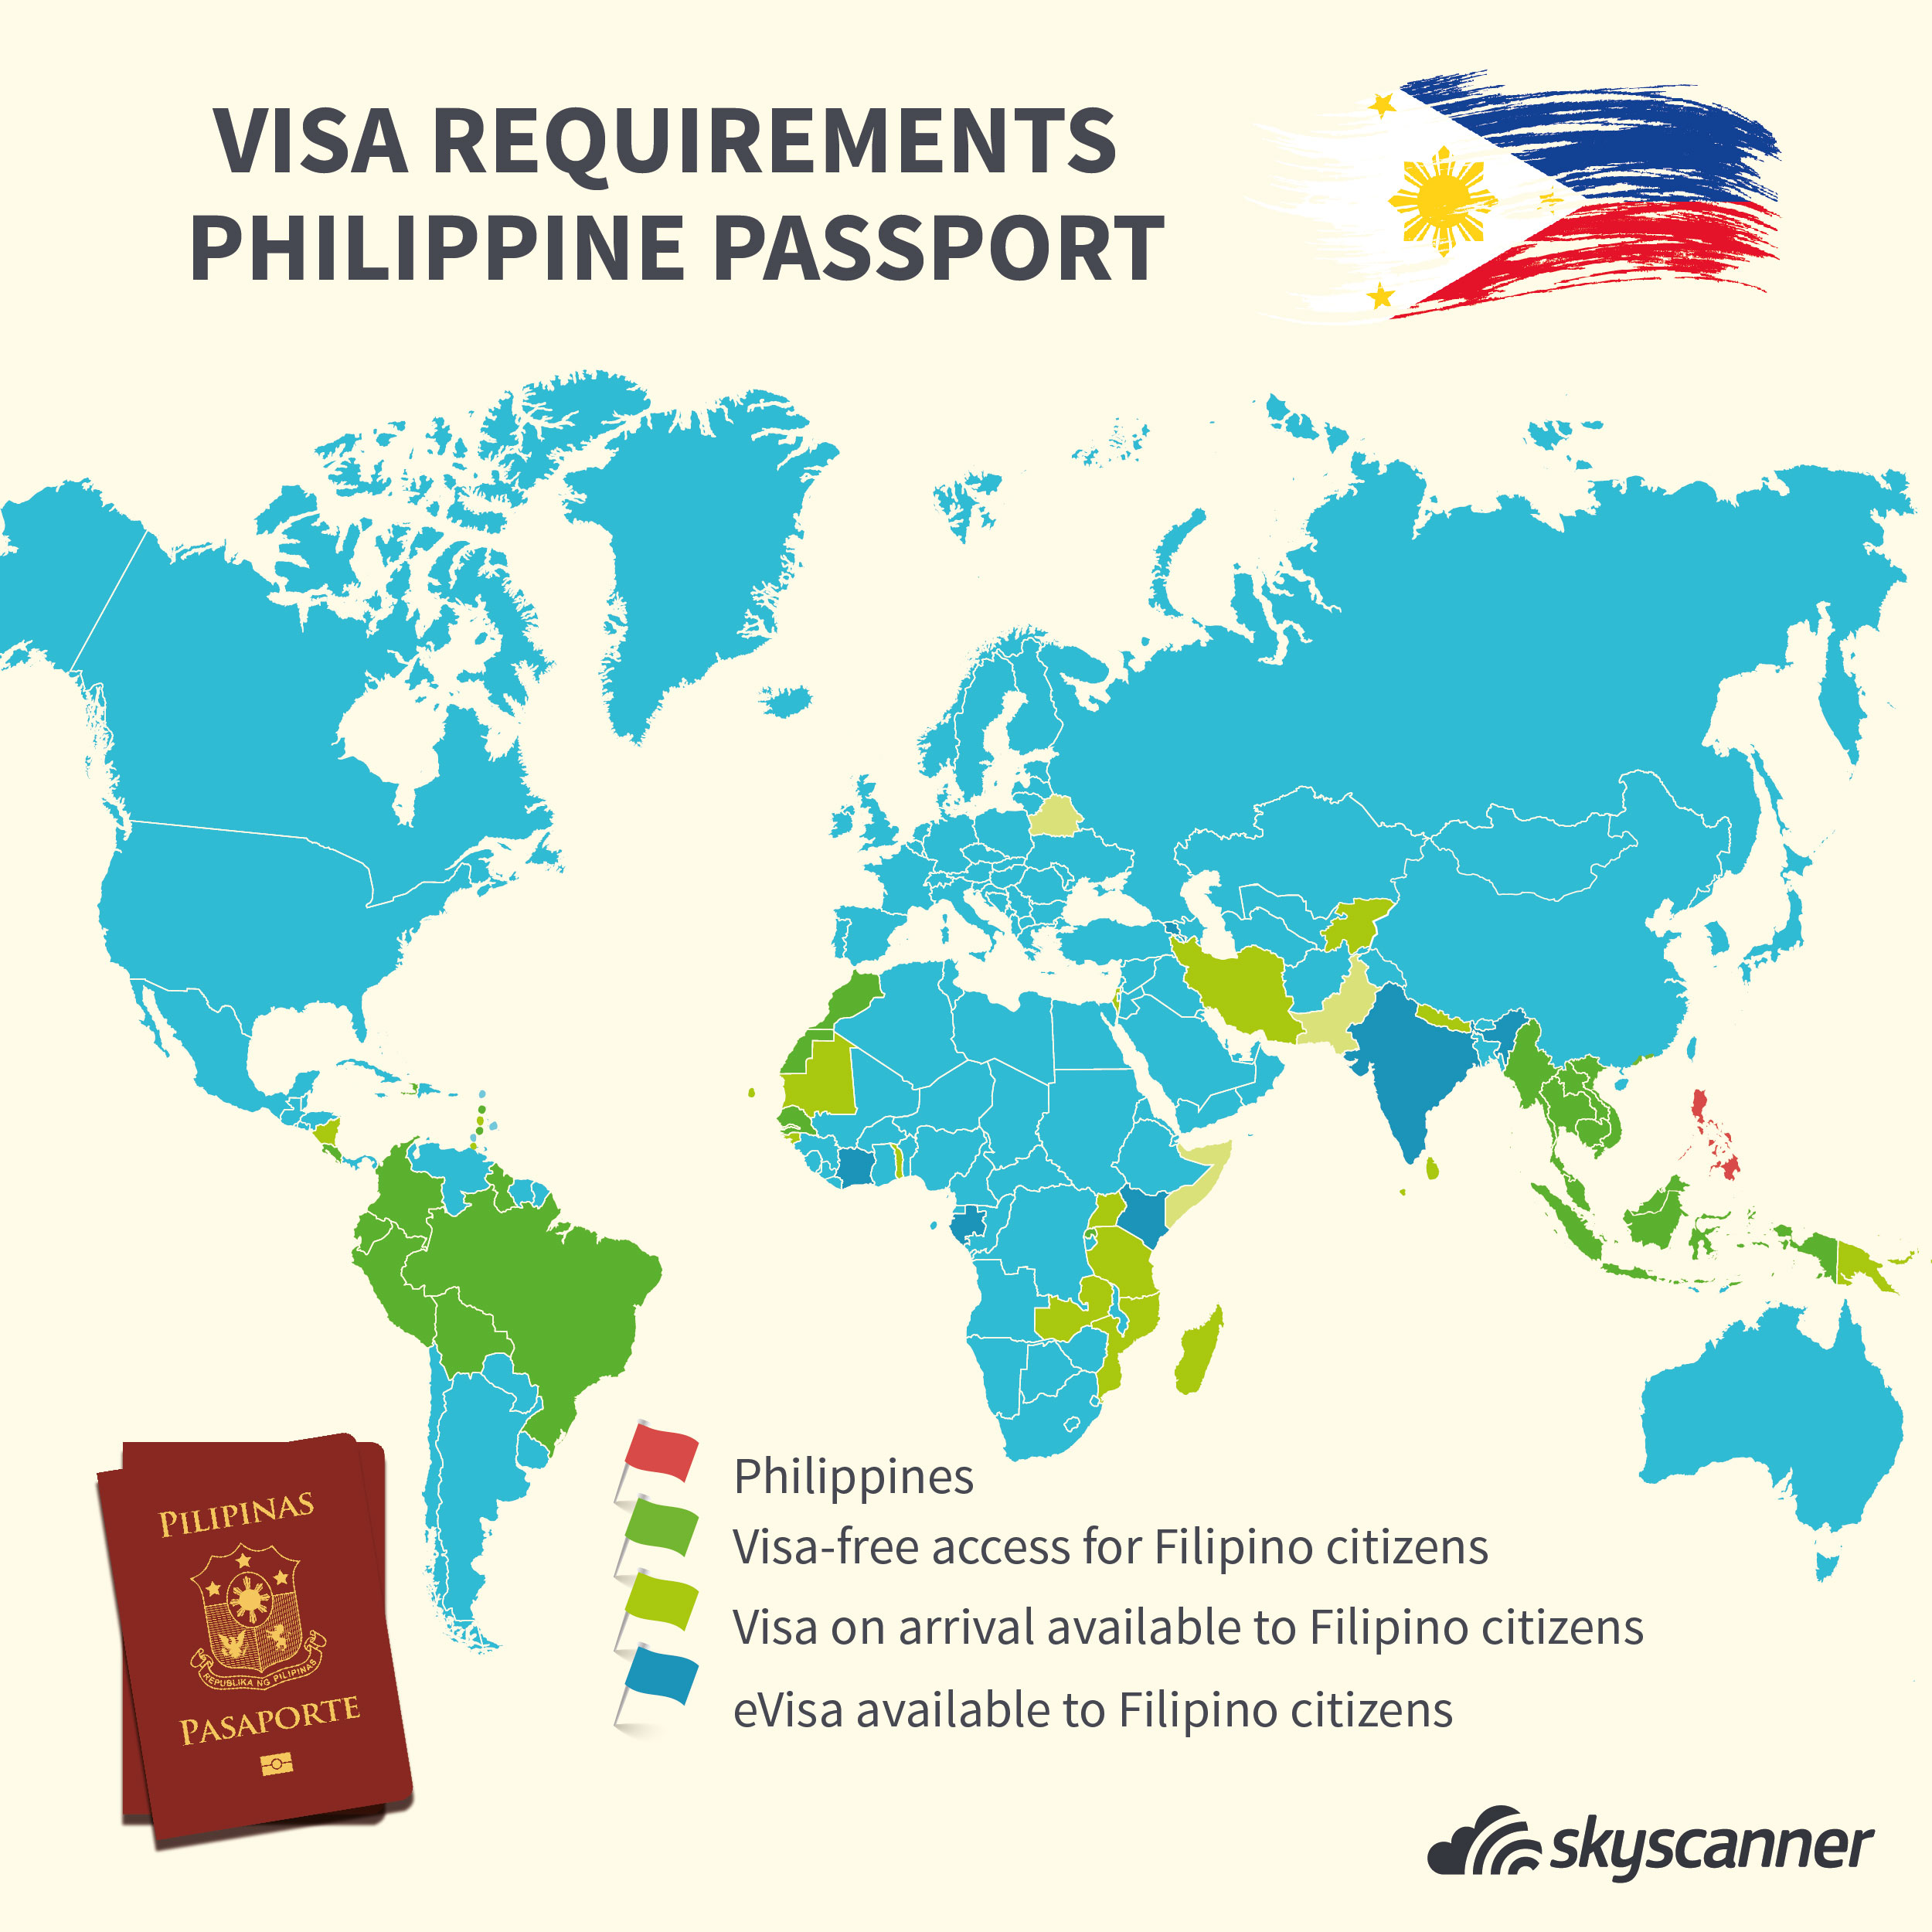 The ultimate visa requirements guide for Filipino travelers